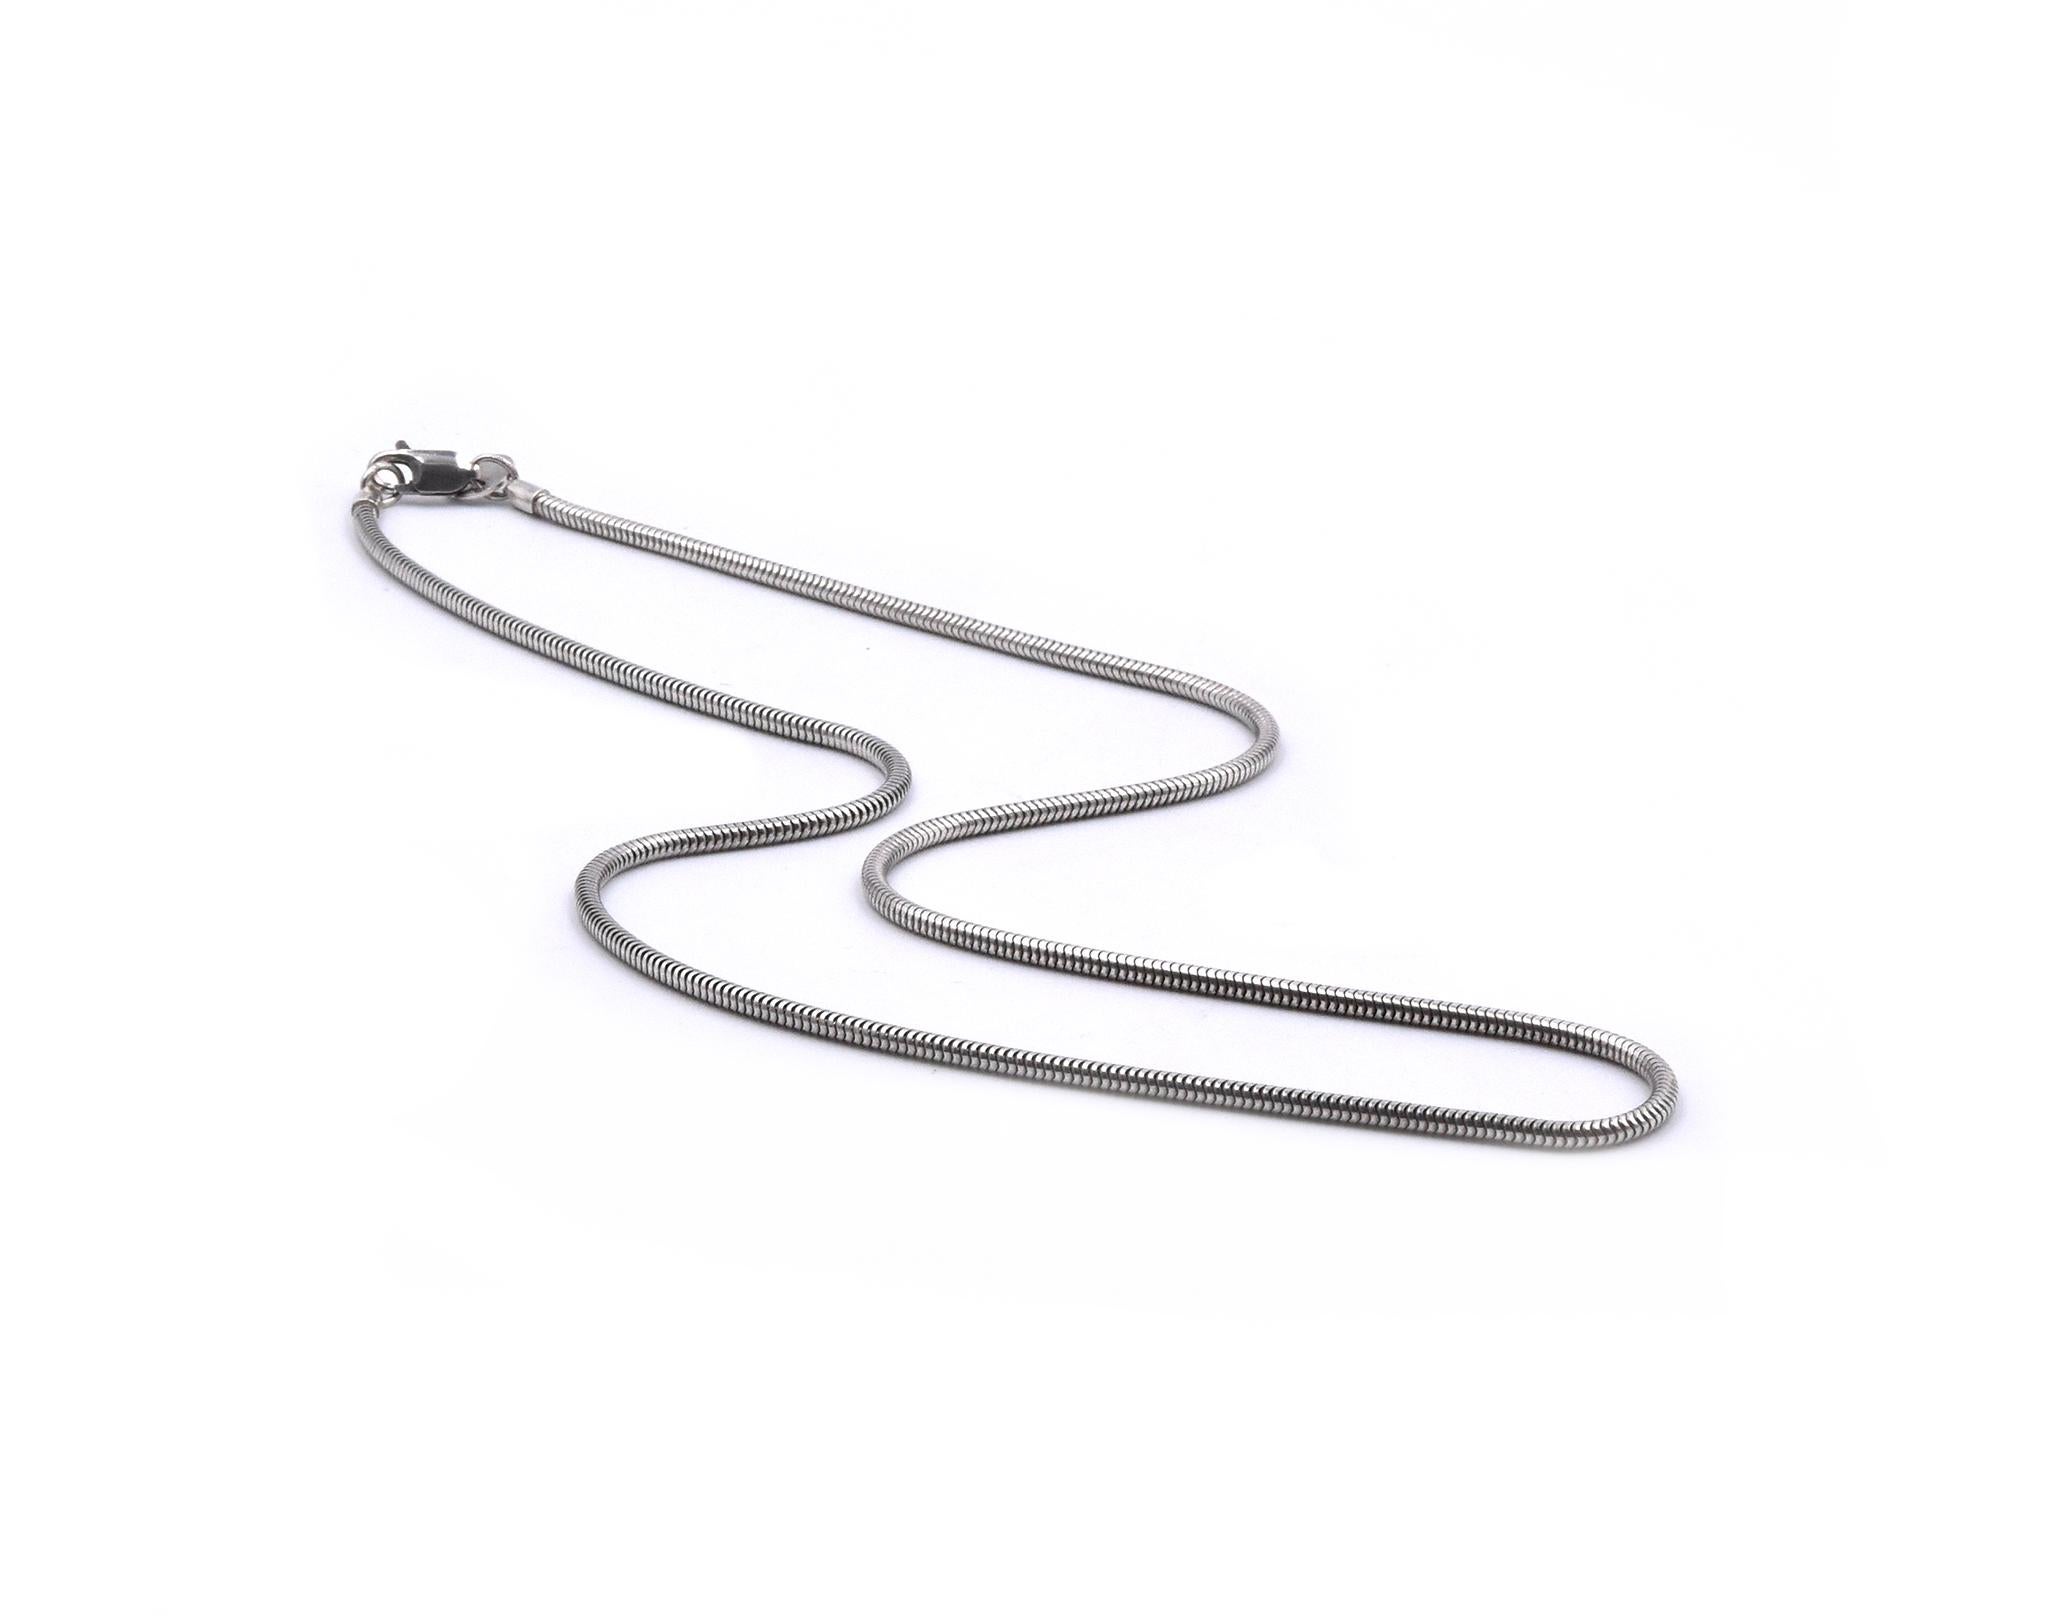 Designer: Tiffany & Co. 
Material: sterling silver
Dimensions: necklace measures 18-inches long
Weight: 10.62 grams
